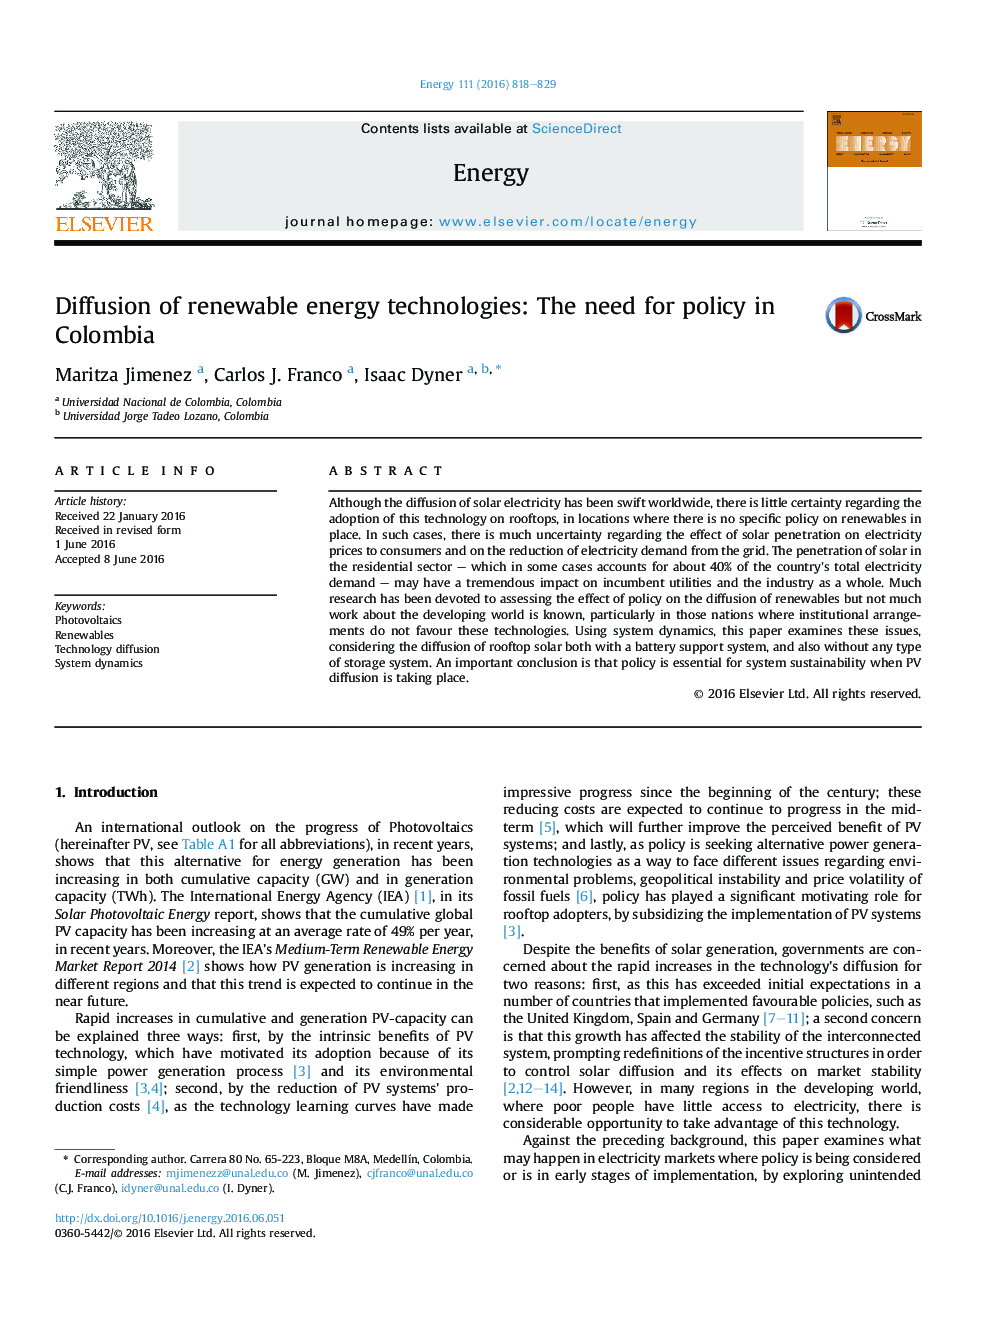 Diffusion of renewable energy technologies: The need for policy in Colombia